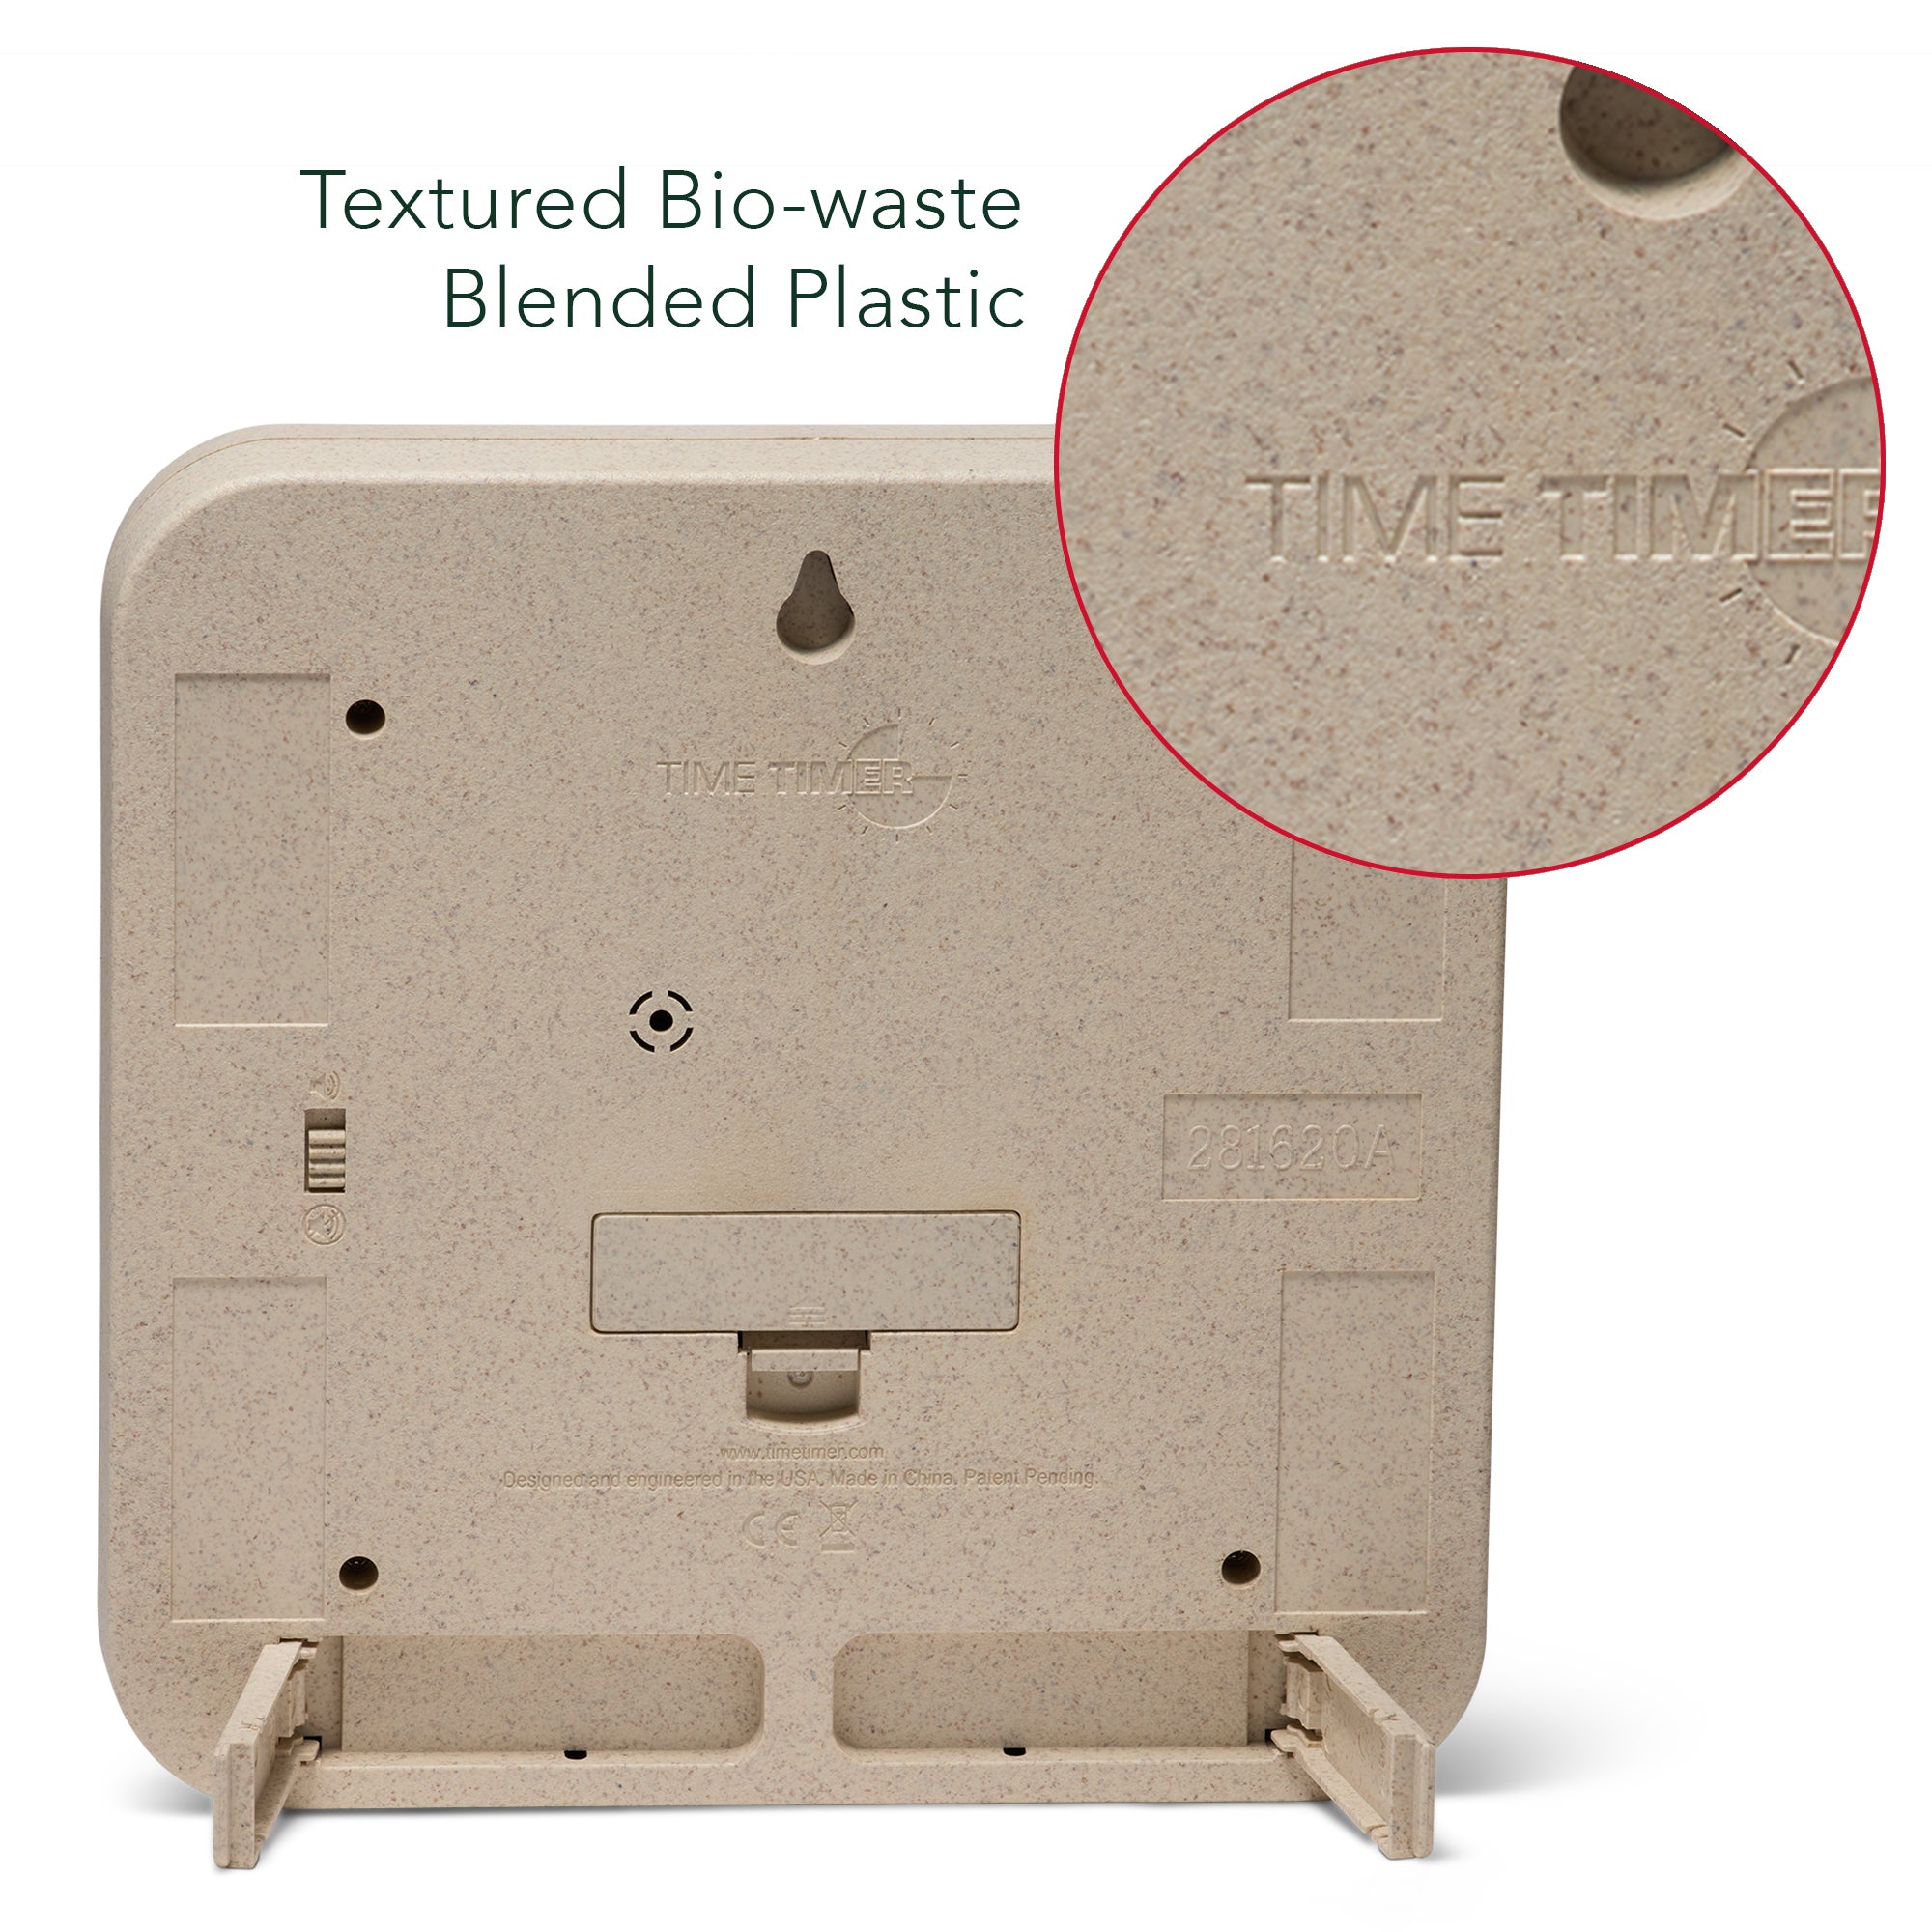 A close-up of the back of the timer is shown. It shows the feet that extend out to place the timer on a tabletop. It also shows the texture of the plastic and reads "Textured Bio-waste Blended Plastic."